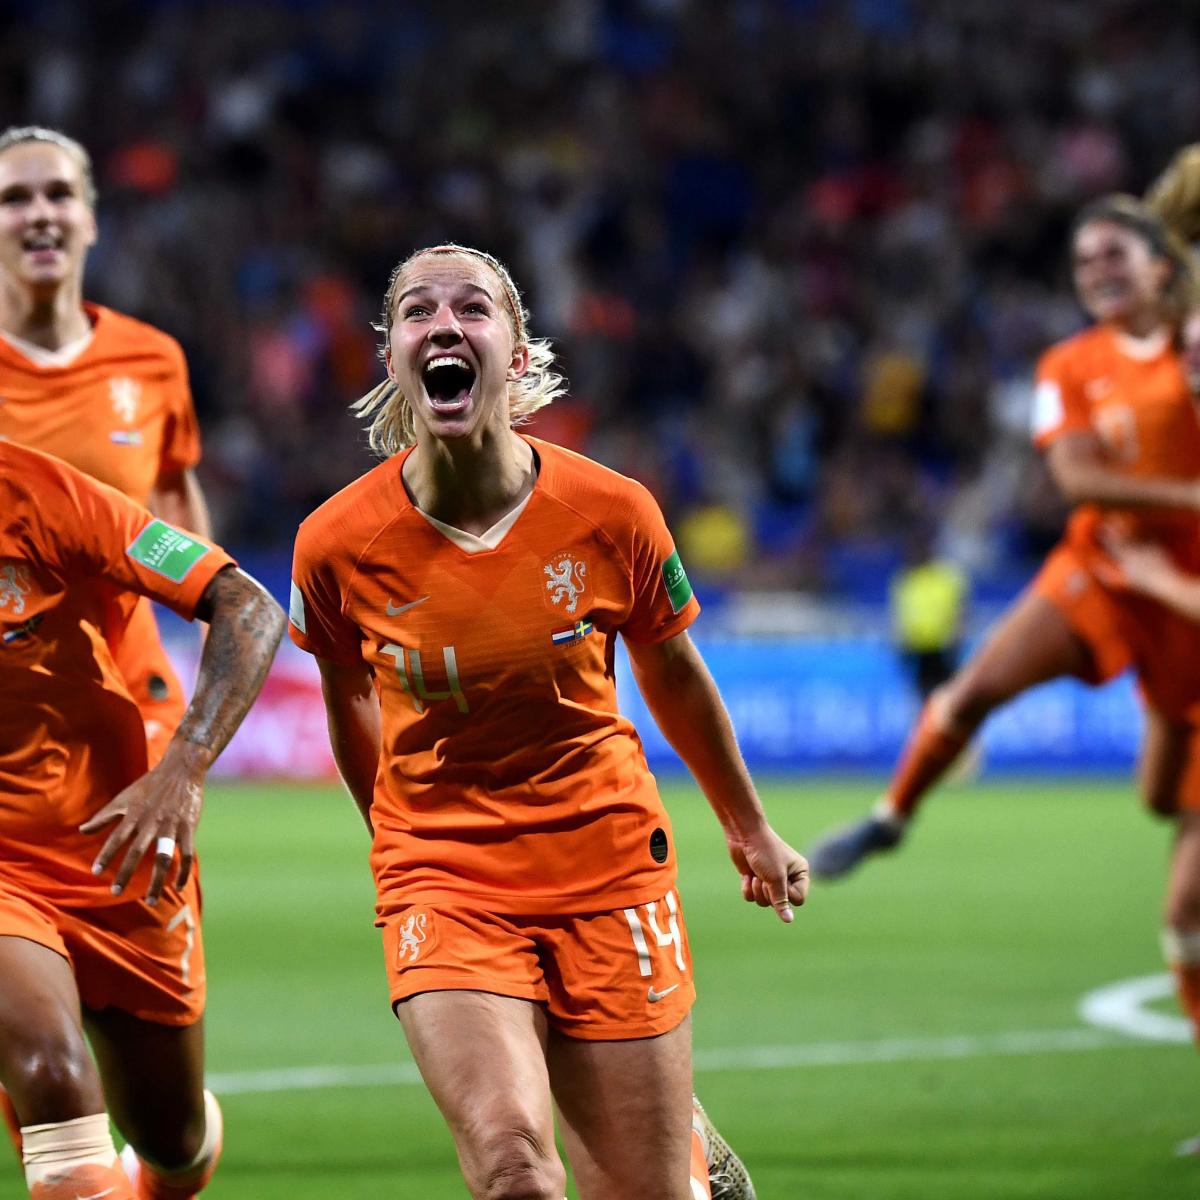 Women's World Cup Schedule 2019 Finals Date, TV Coverage and Info Hub